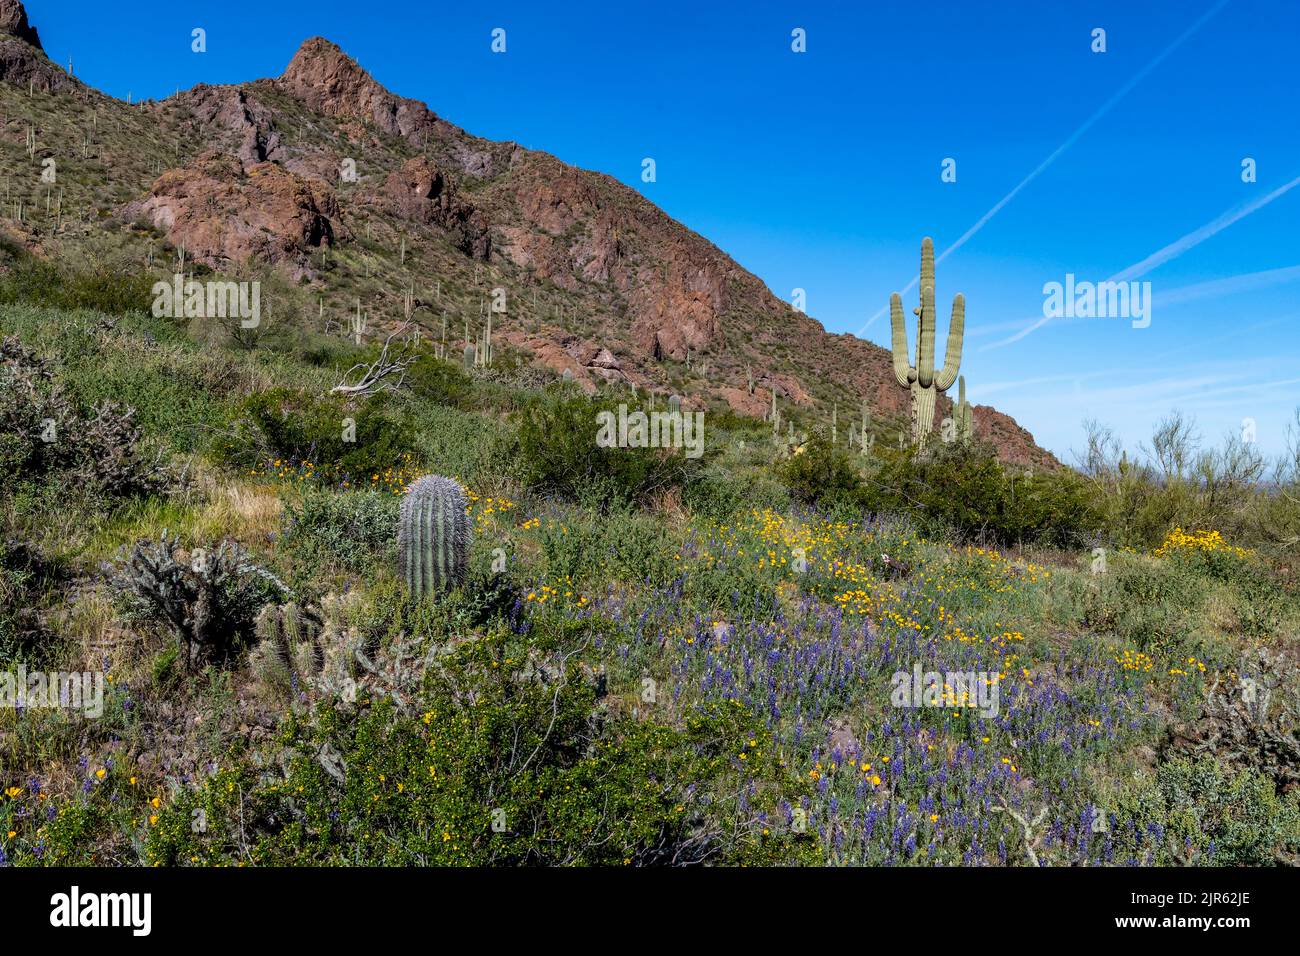 Blooming desert at Picacho Peak State Park (Arizona, USA) in March 2020. Stock Photo